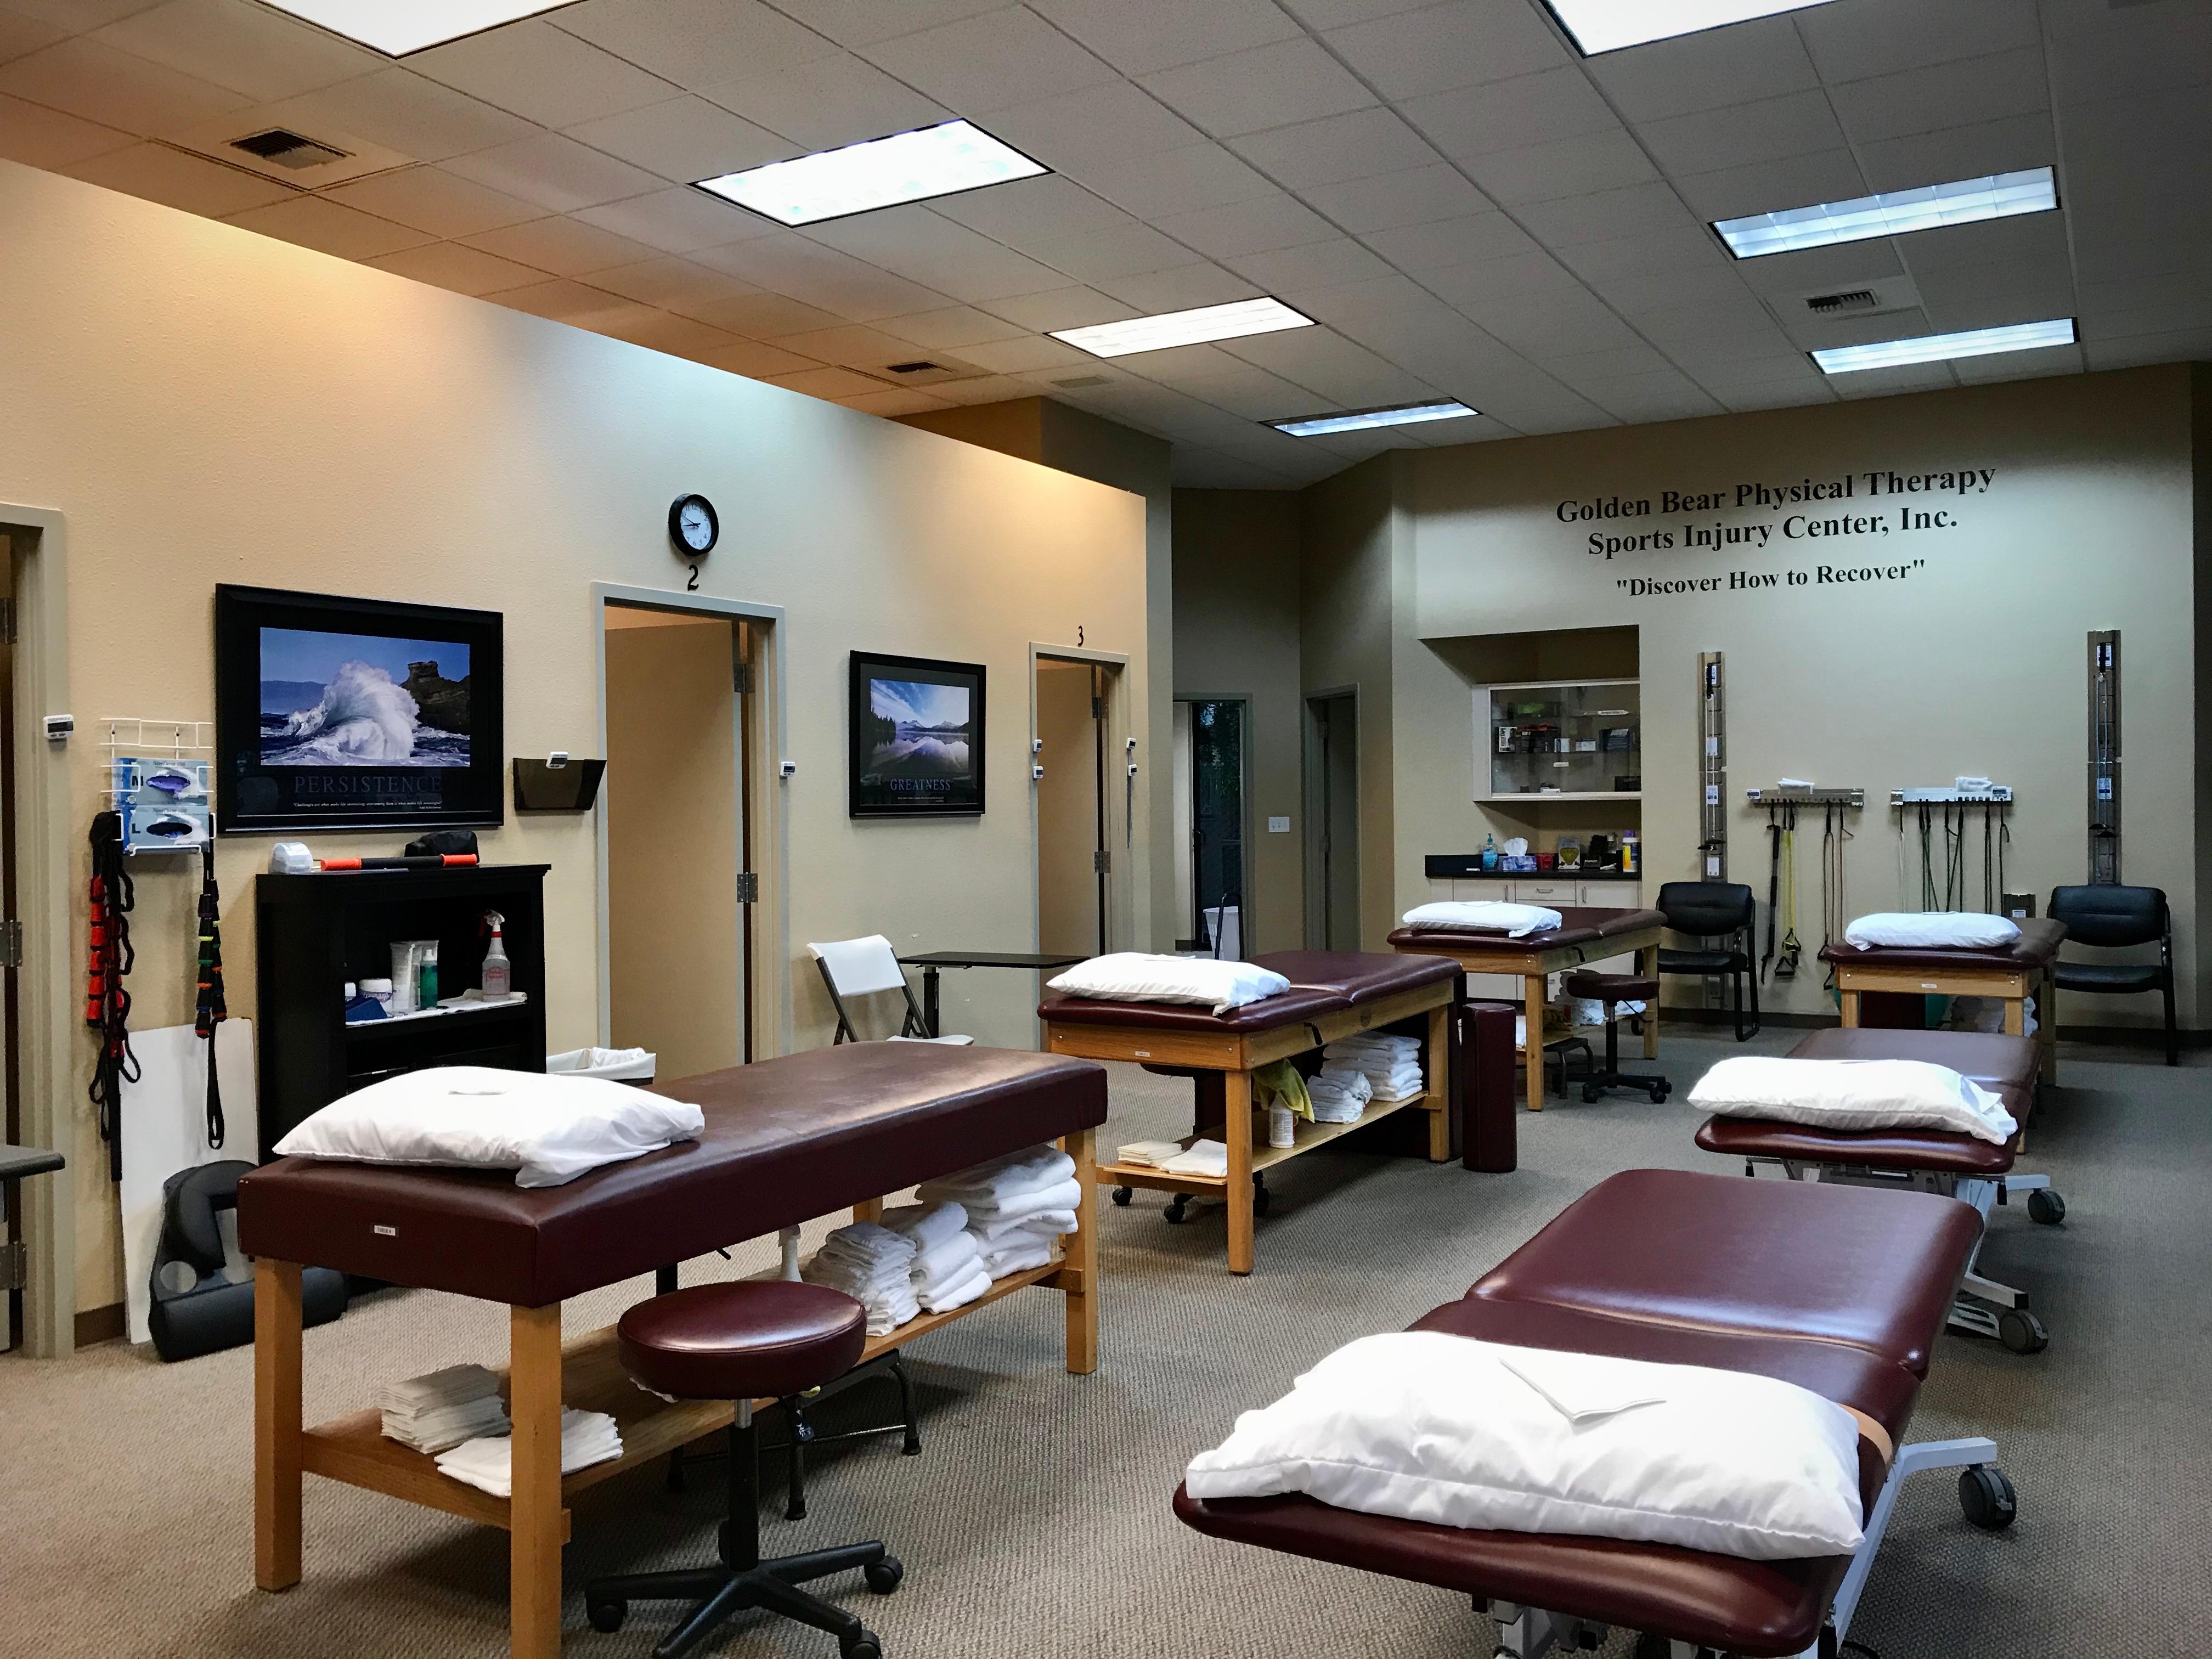 Golden Bear Physical Therapy Sports Injury Center Photo